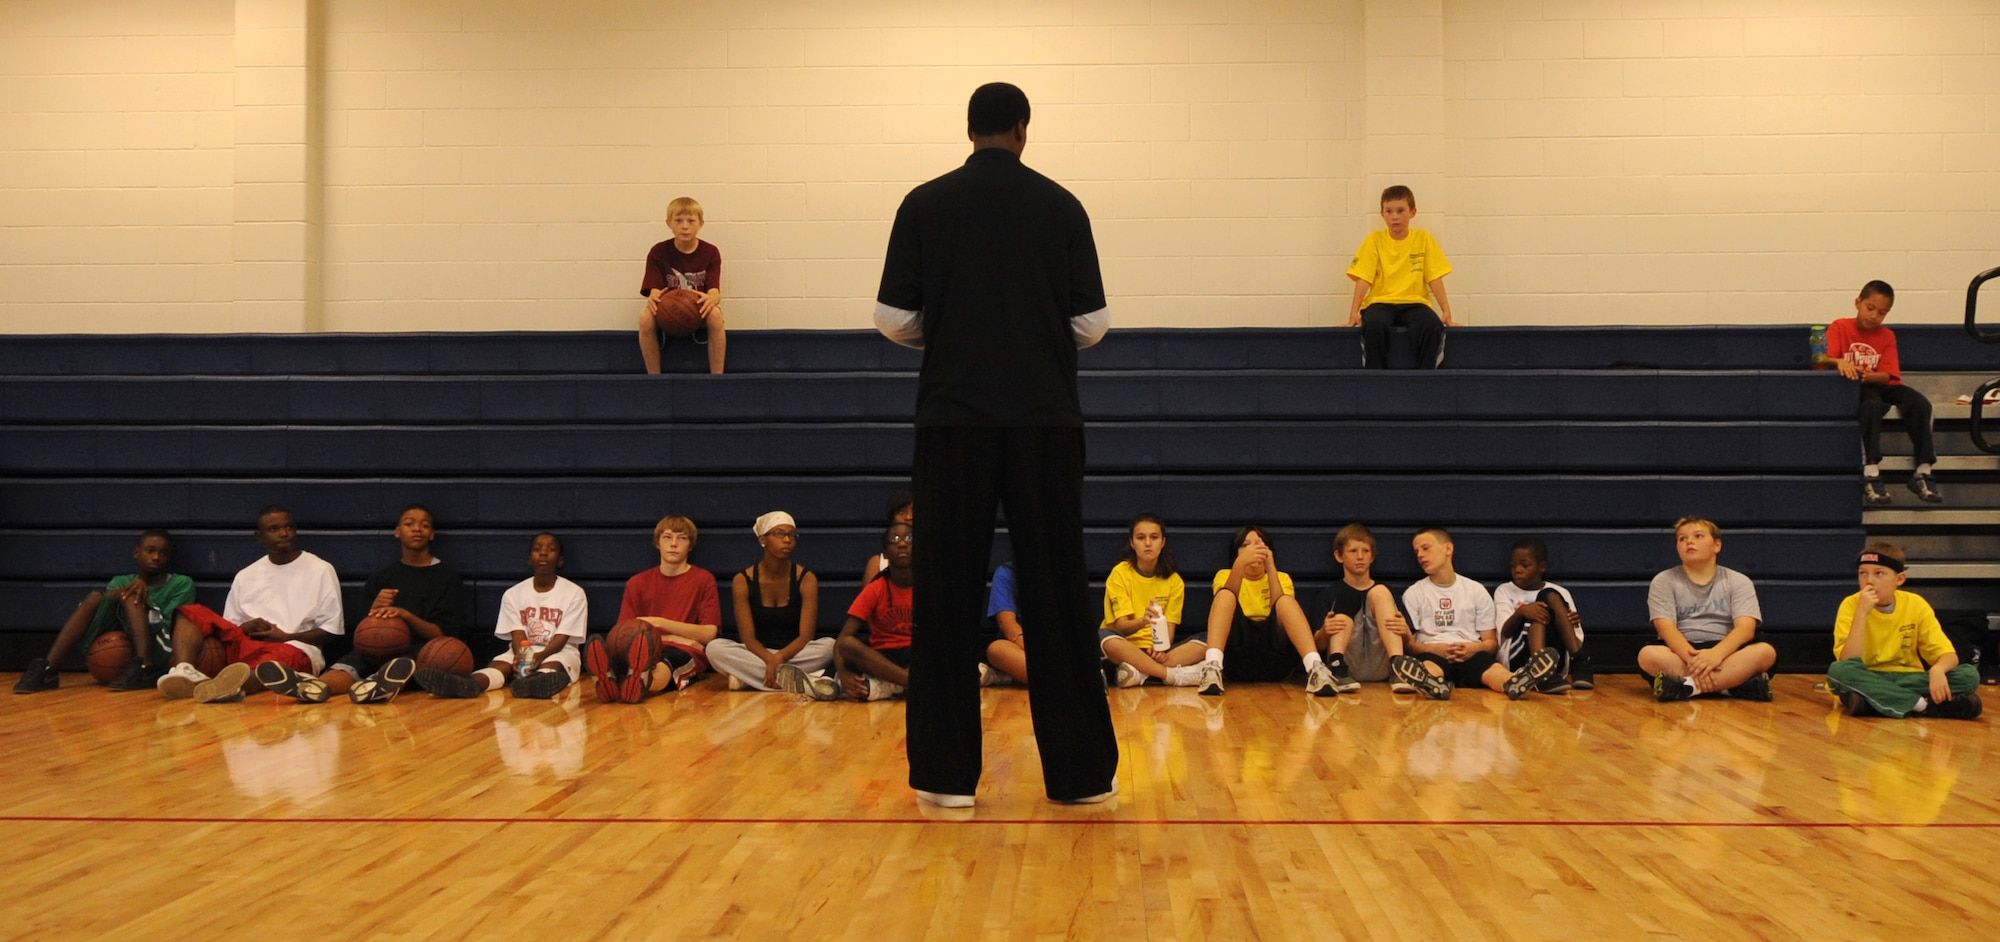 Ervin Johnson, former National Basketball Association player, speaks to 20 Buckley youths during a basketball clinic hosted by the 460th Force Support Squadron youth programs at the fitness center Oct. 17. (U.S. Air Force photo by Senior Airman John Easterling)